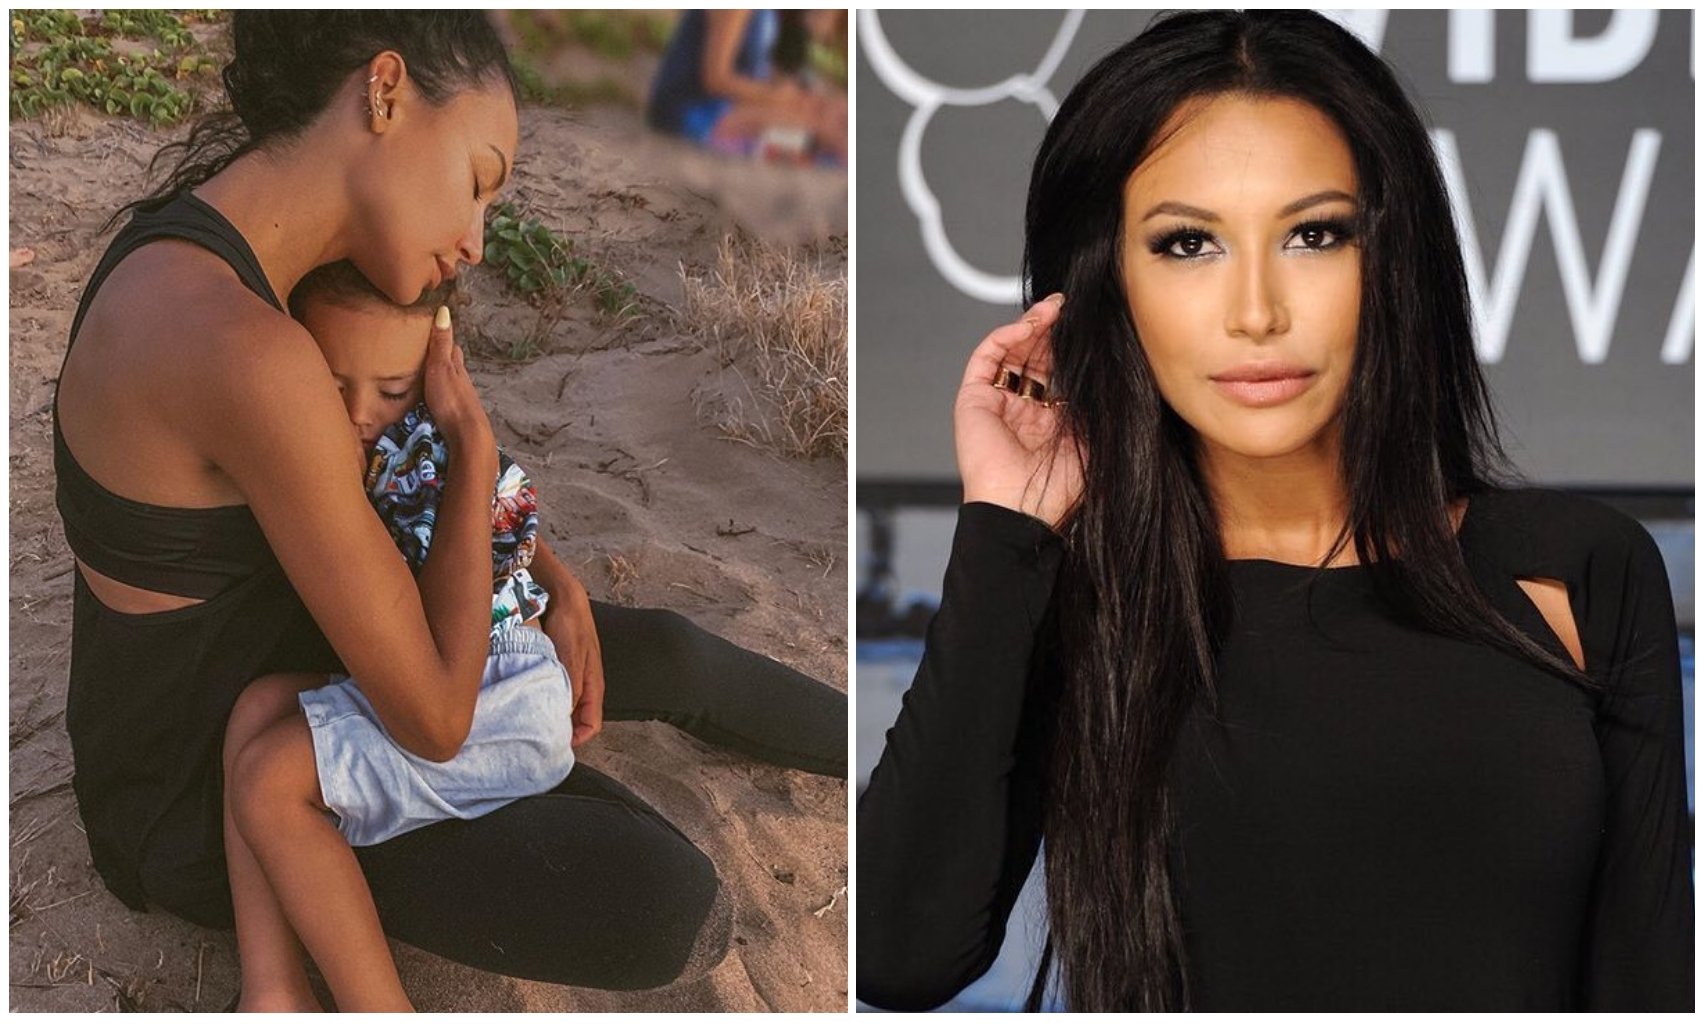 Glee star, Naya Rivera's cause of death identified as accidental drowning